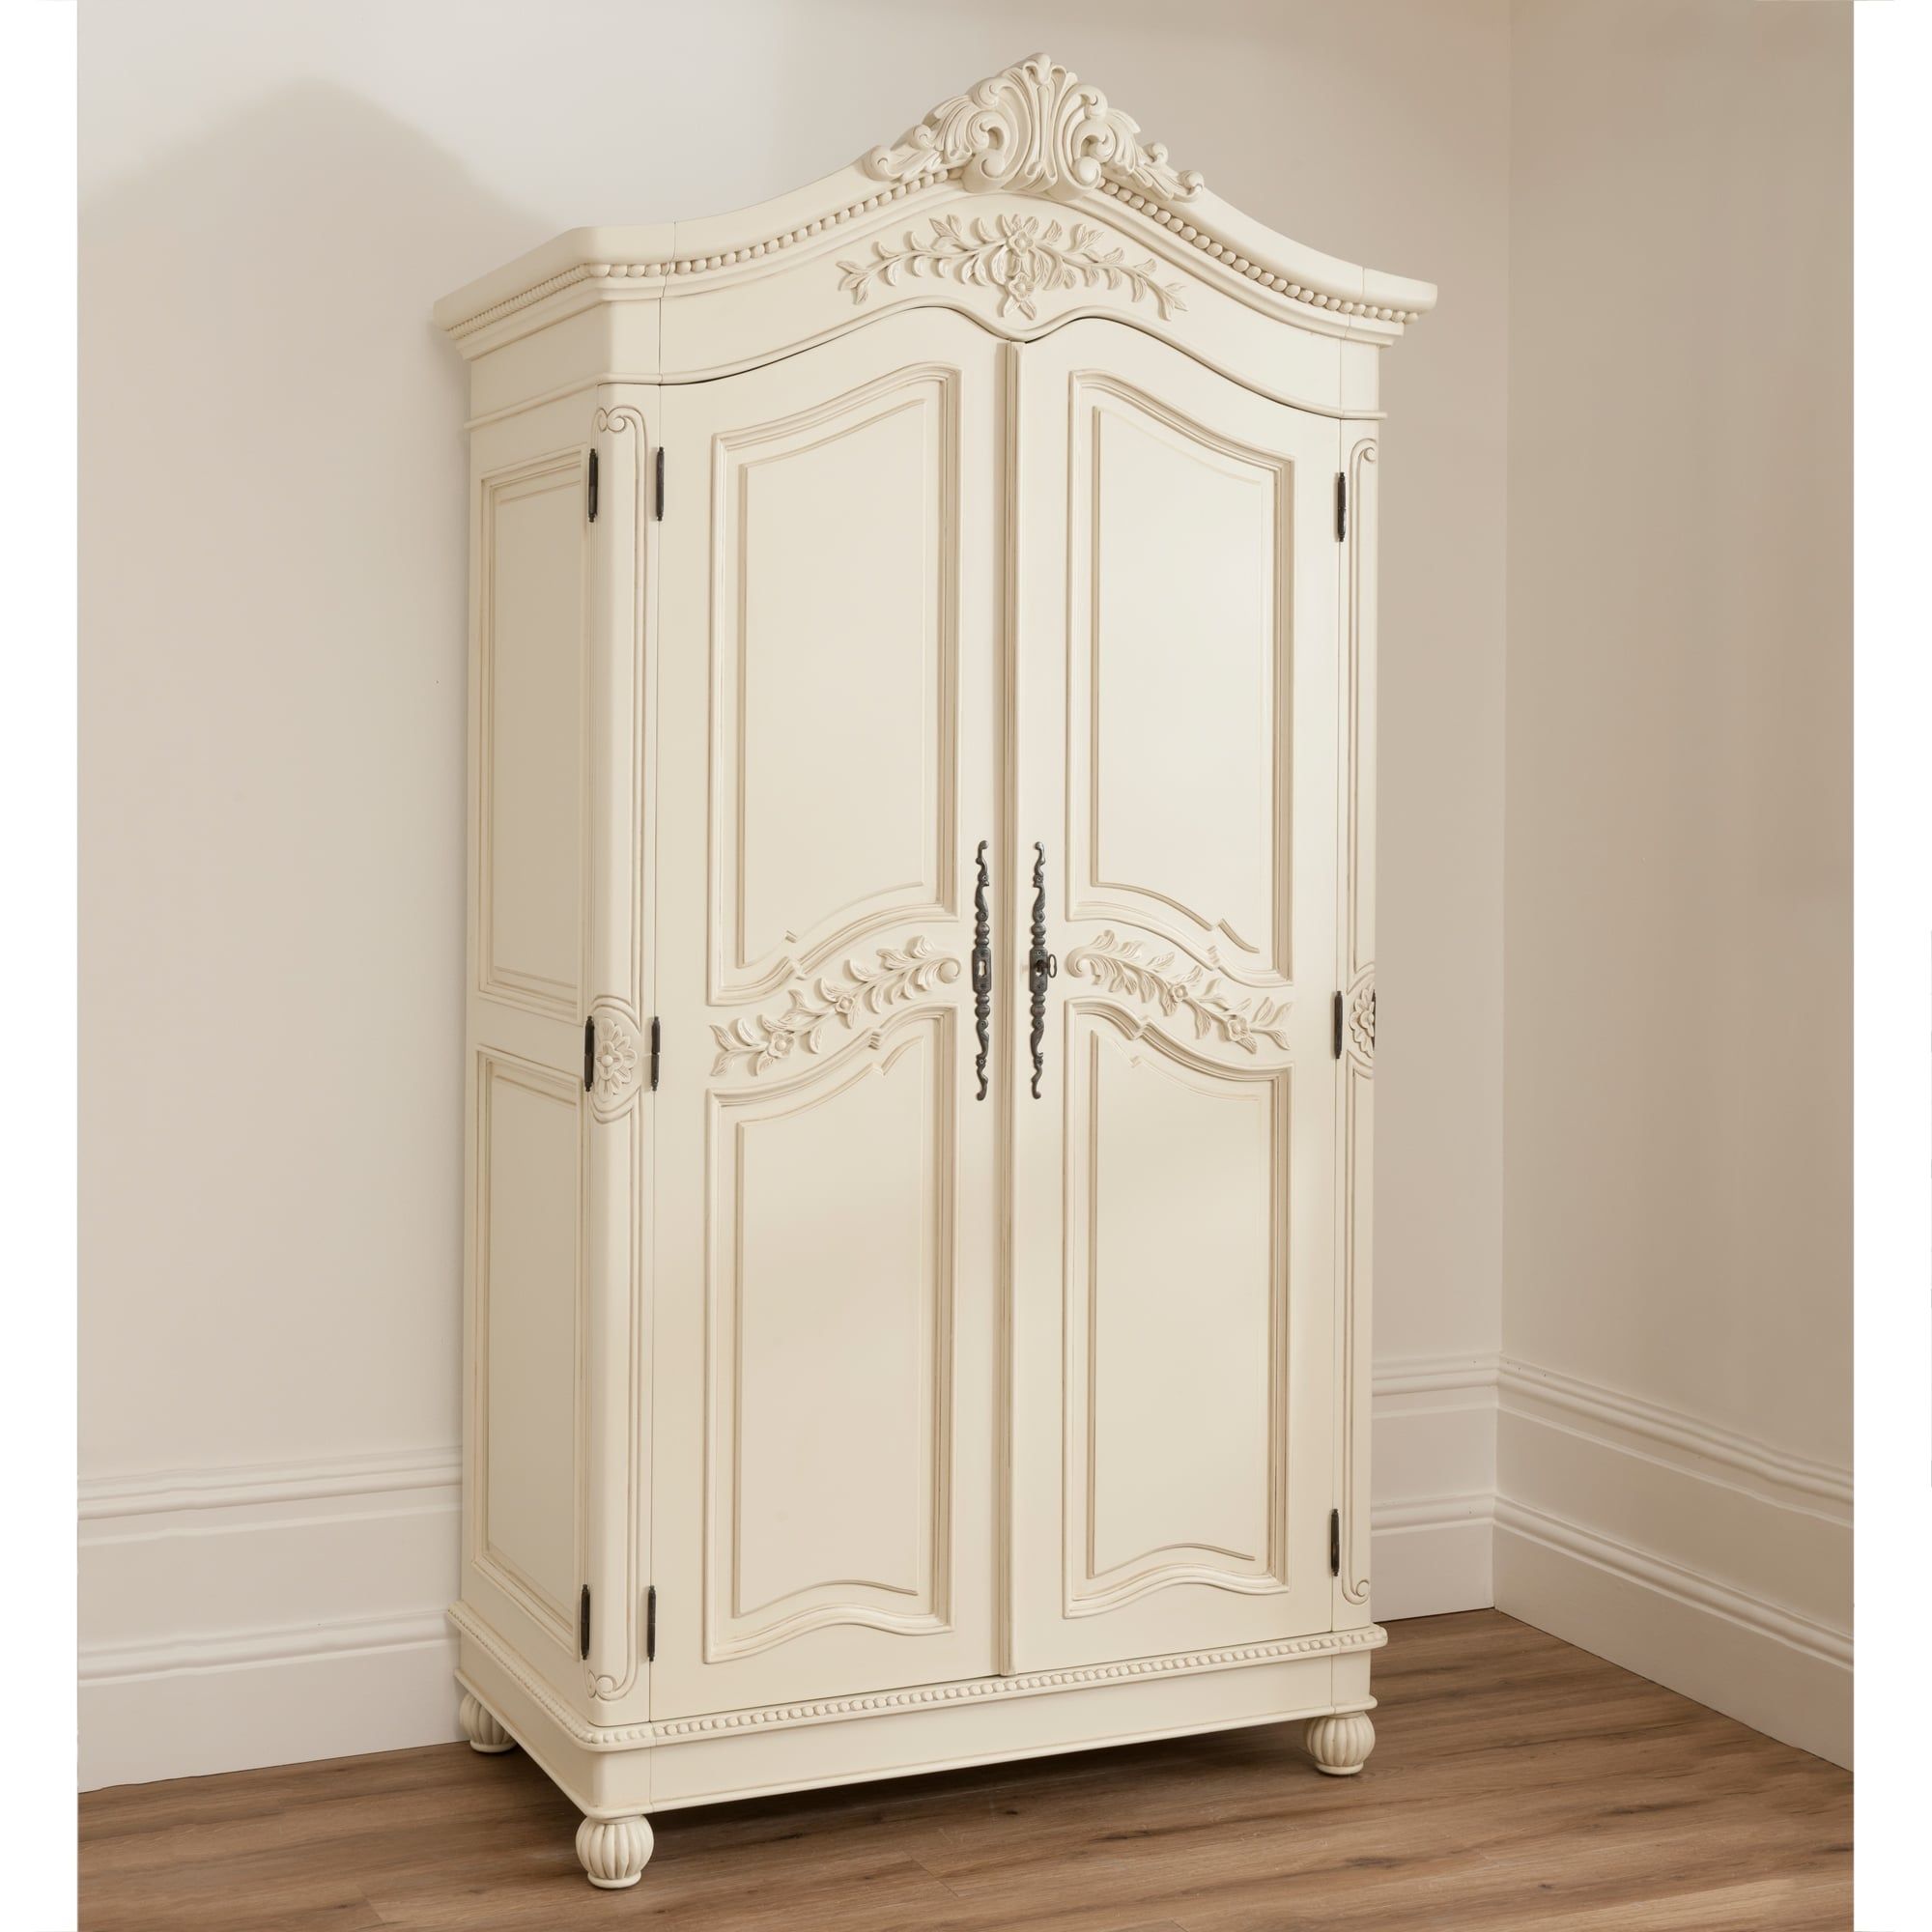 Bordeaux Ivory Shabby Chic Wardrobe | Shabby Chic Furniture With Regard To Shabby Chic Wardrobes For Sale (Photo 13 of 15)